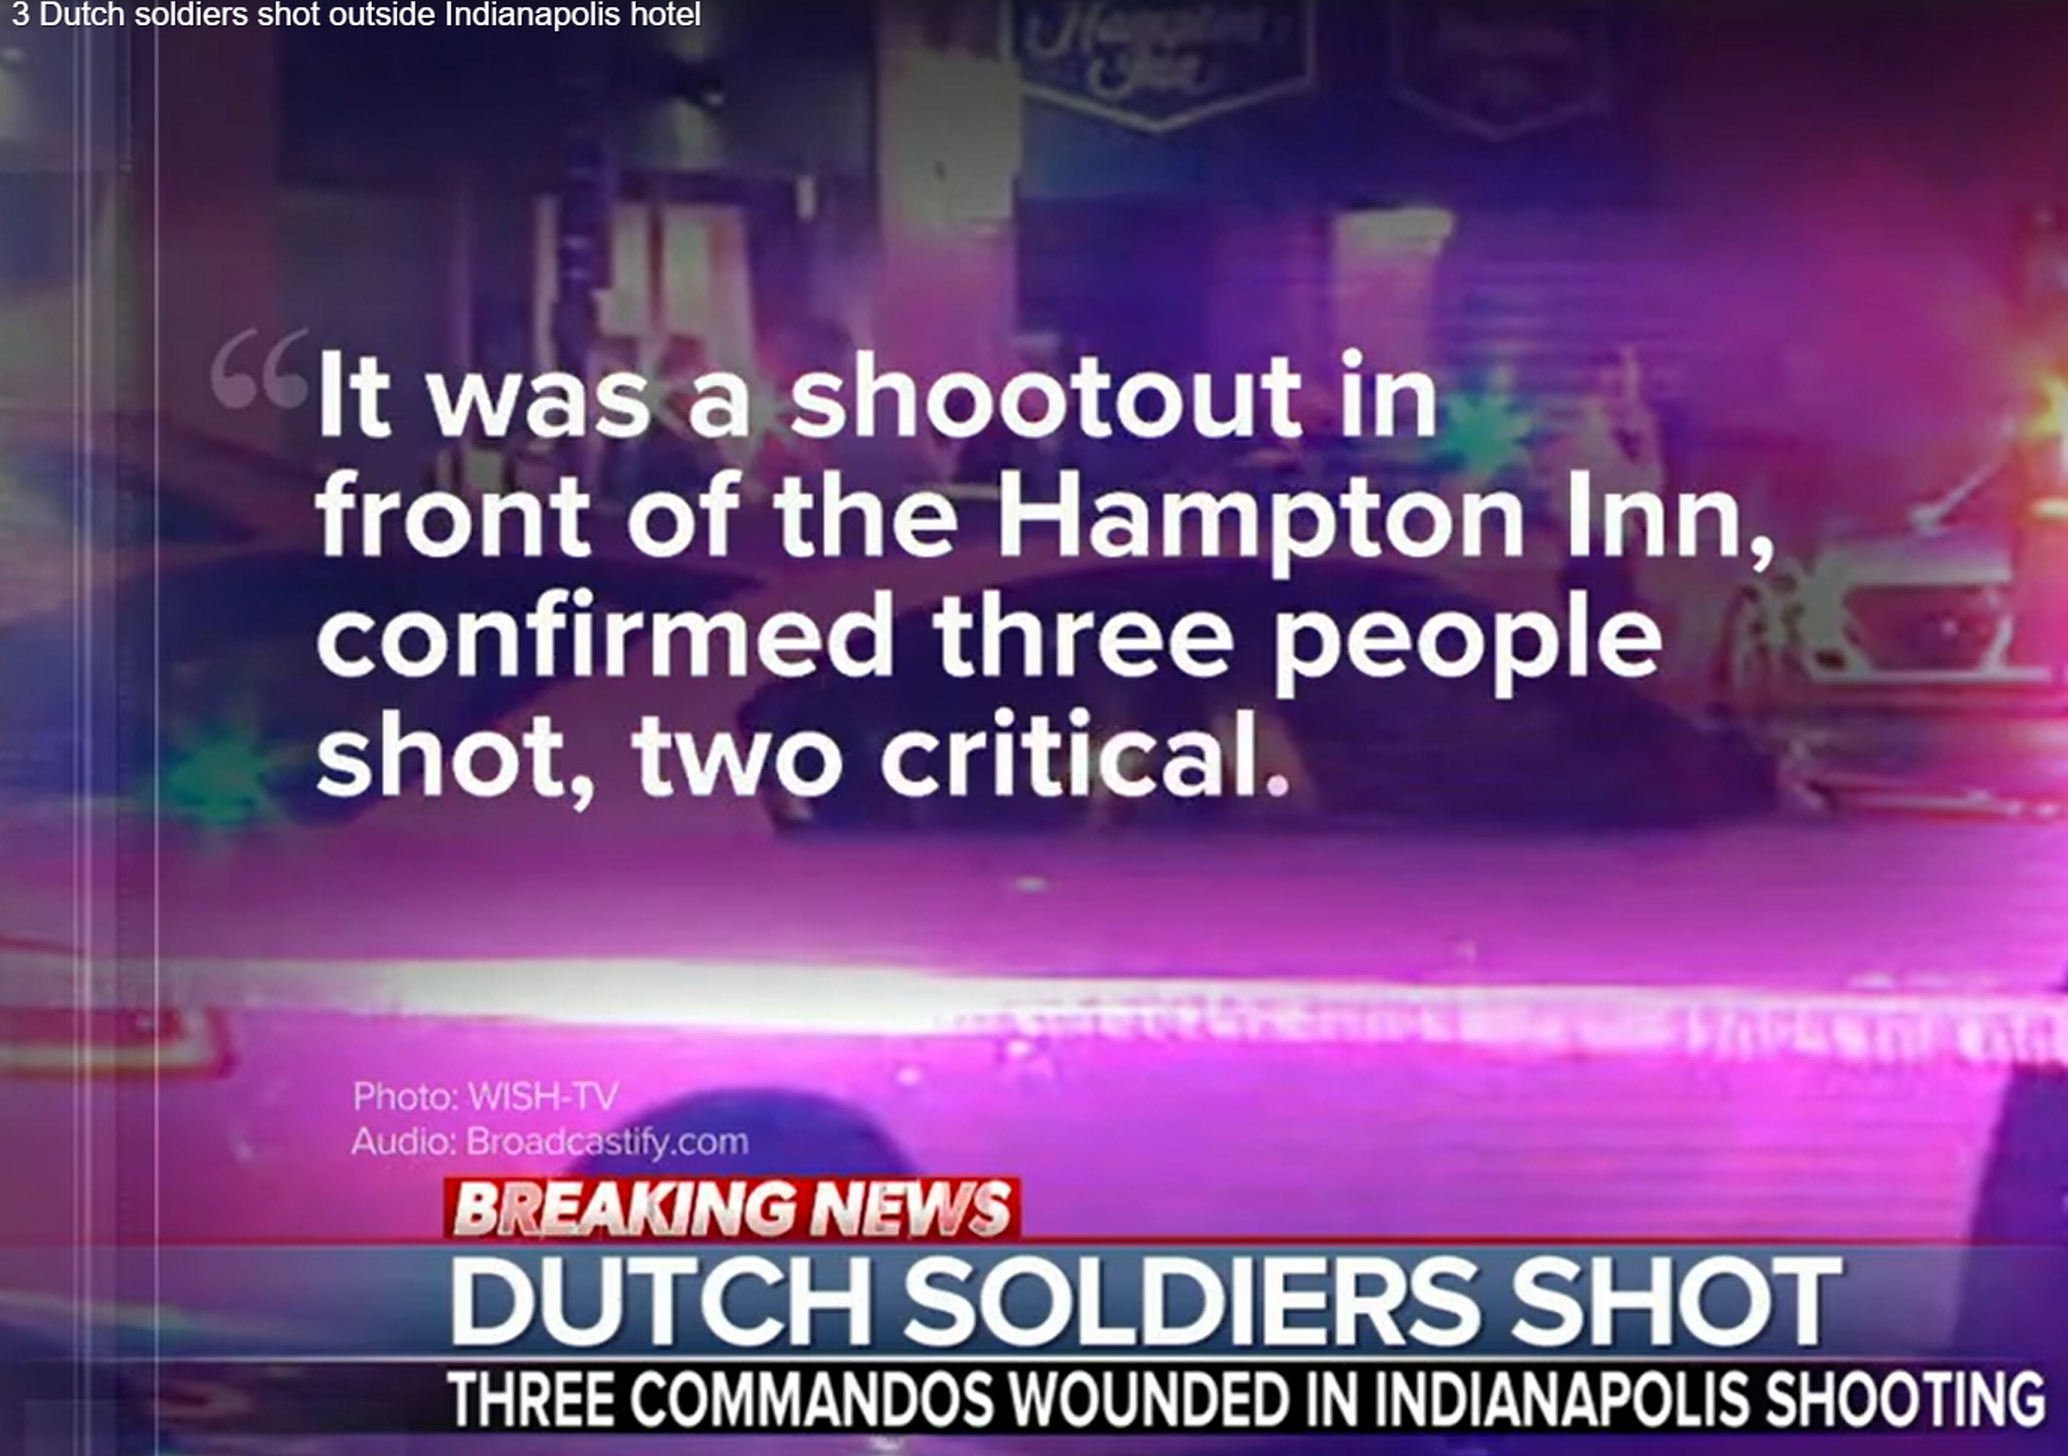 3 Dutch soldiers shot outside hotel in Indianapolis